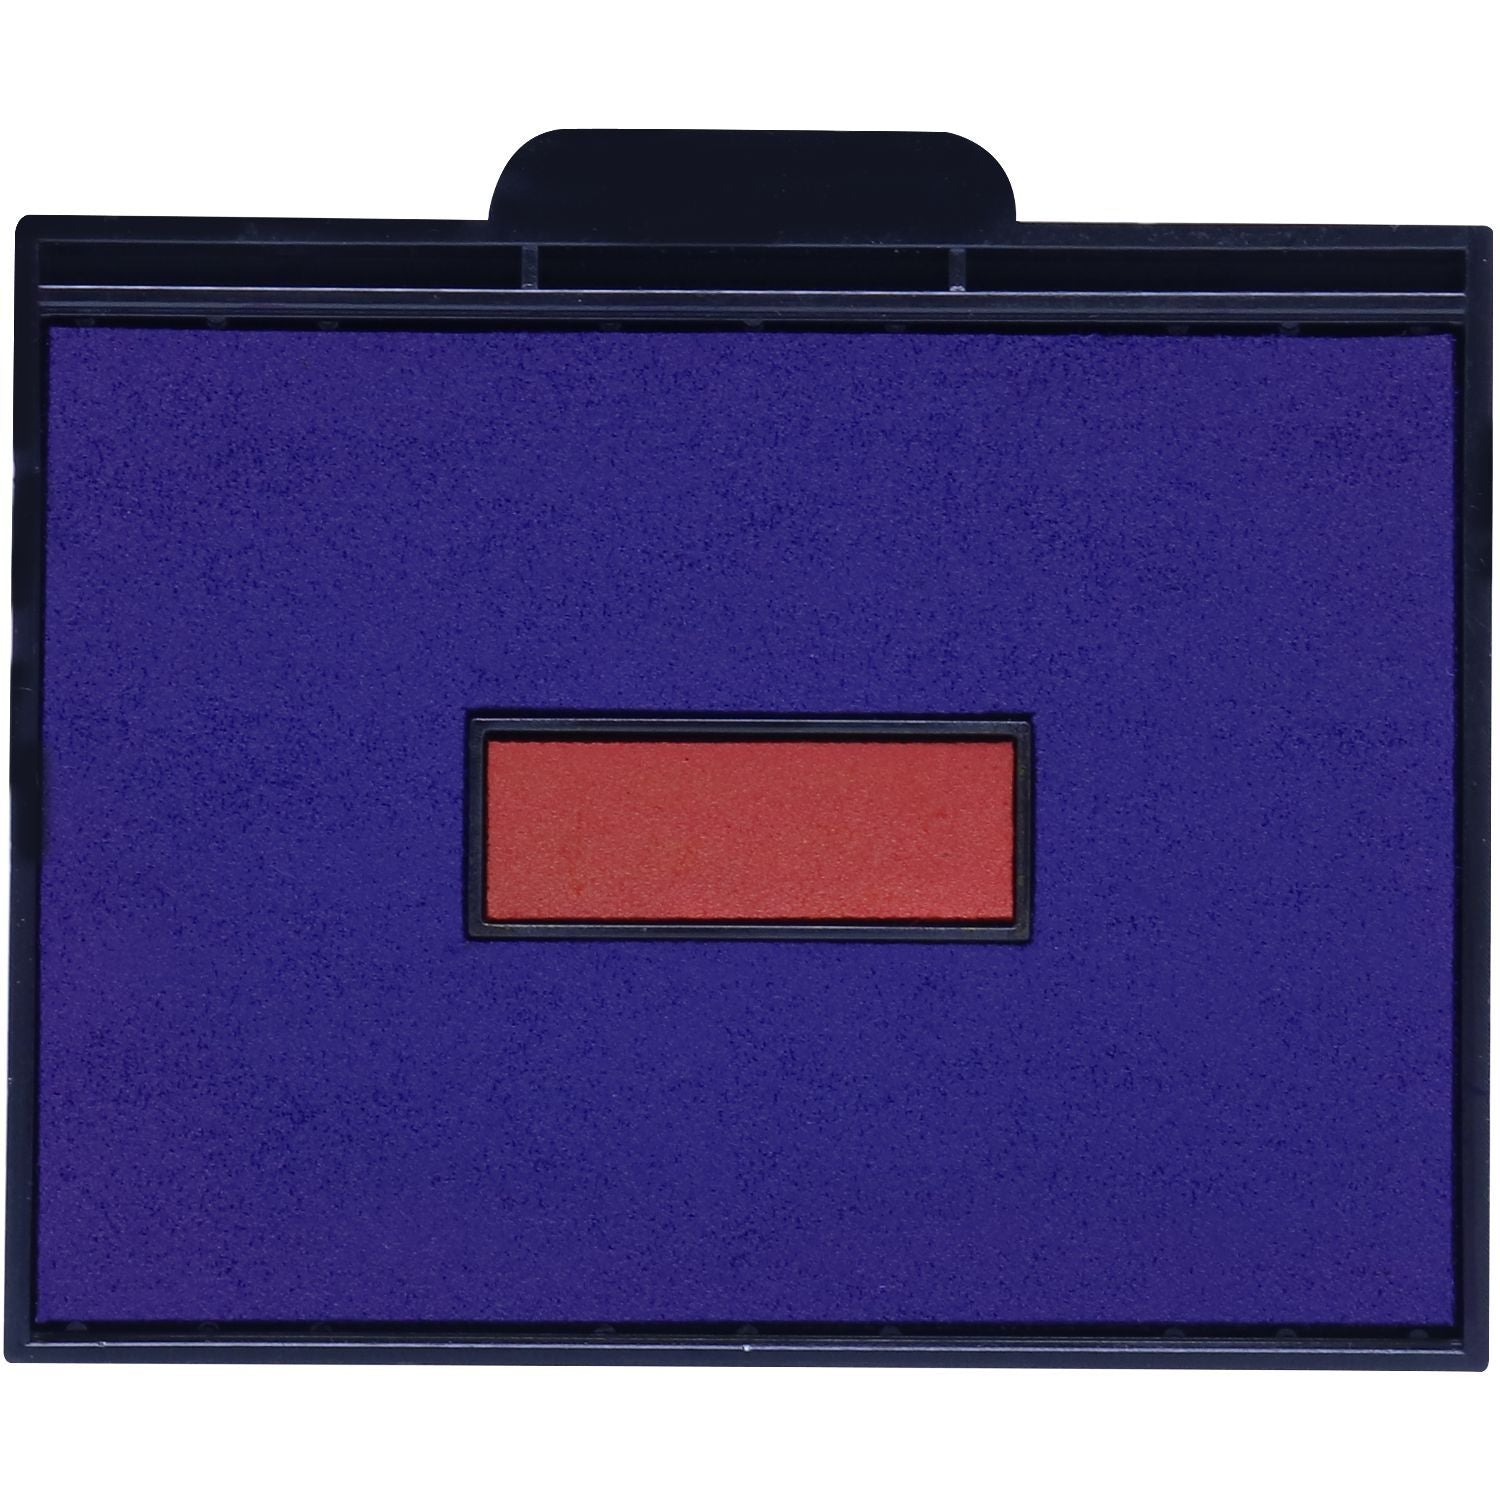 Two Color Replacement Ink Pad For Hm 6103 Blue Red